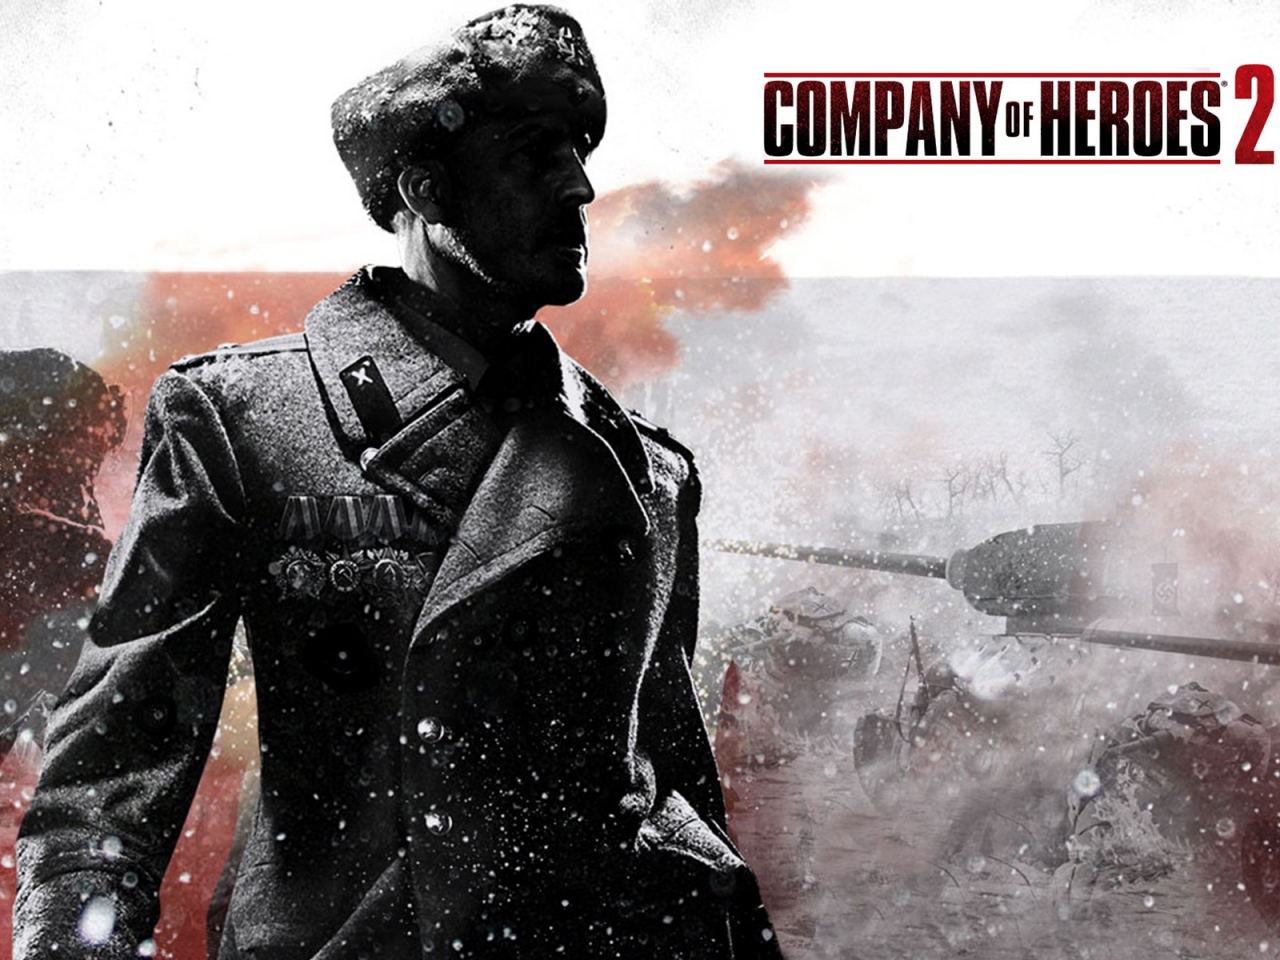 Company of Heroes 2 Character for 1280 x 960 resolution